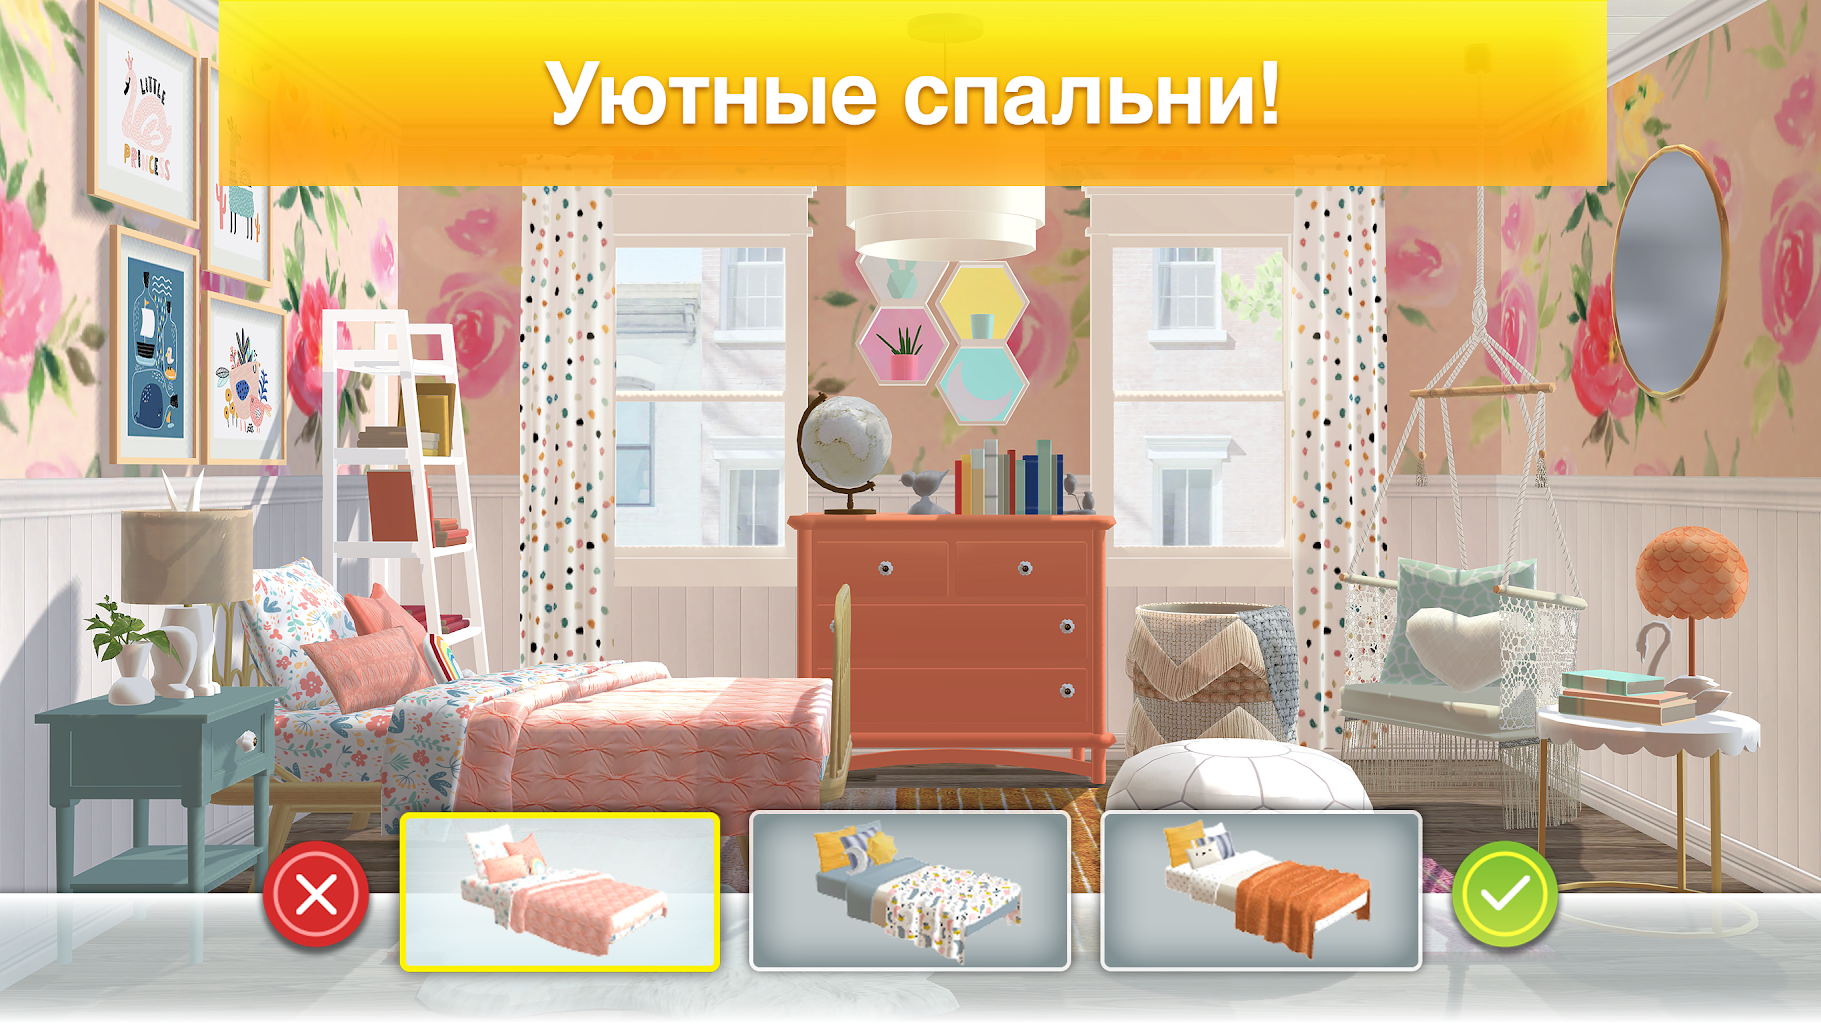 Property games. Property brothers игра. Home Design игра. Property brothers Home Design. Property brothers игра первая комната.